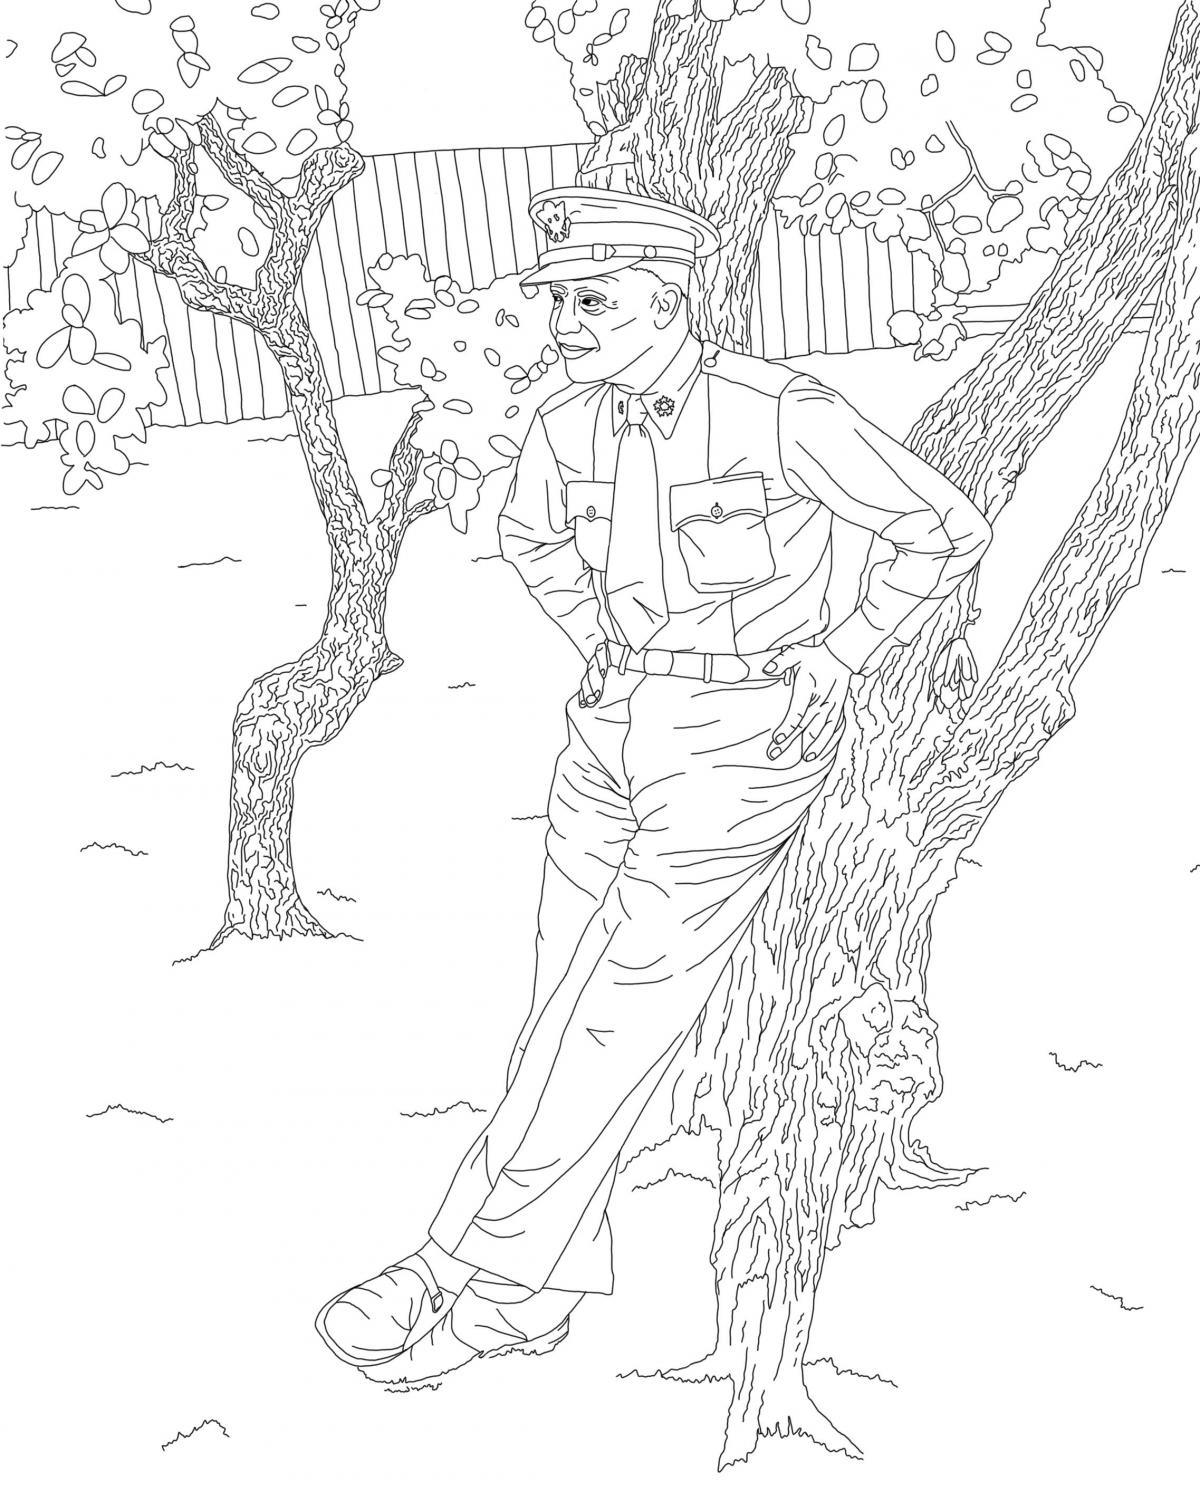 Coloring page image 68-527-8